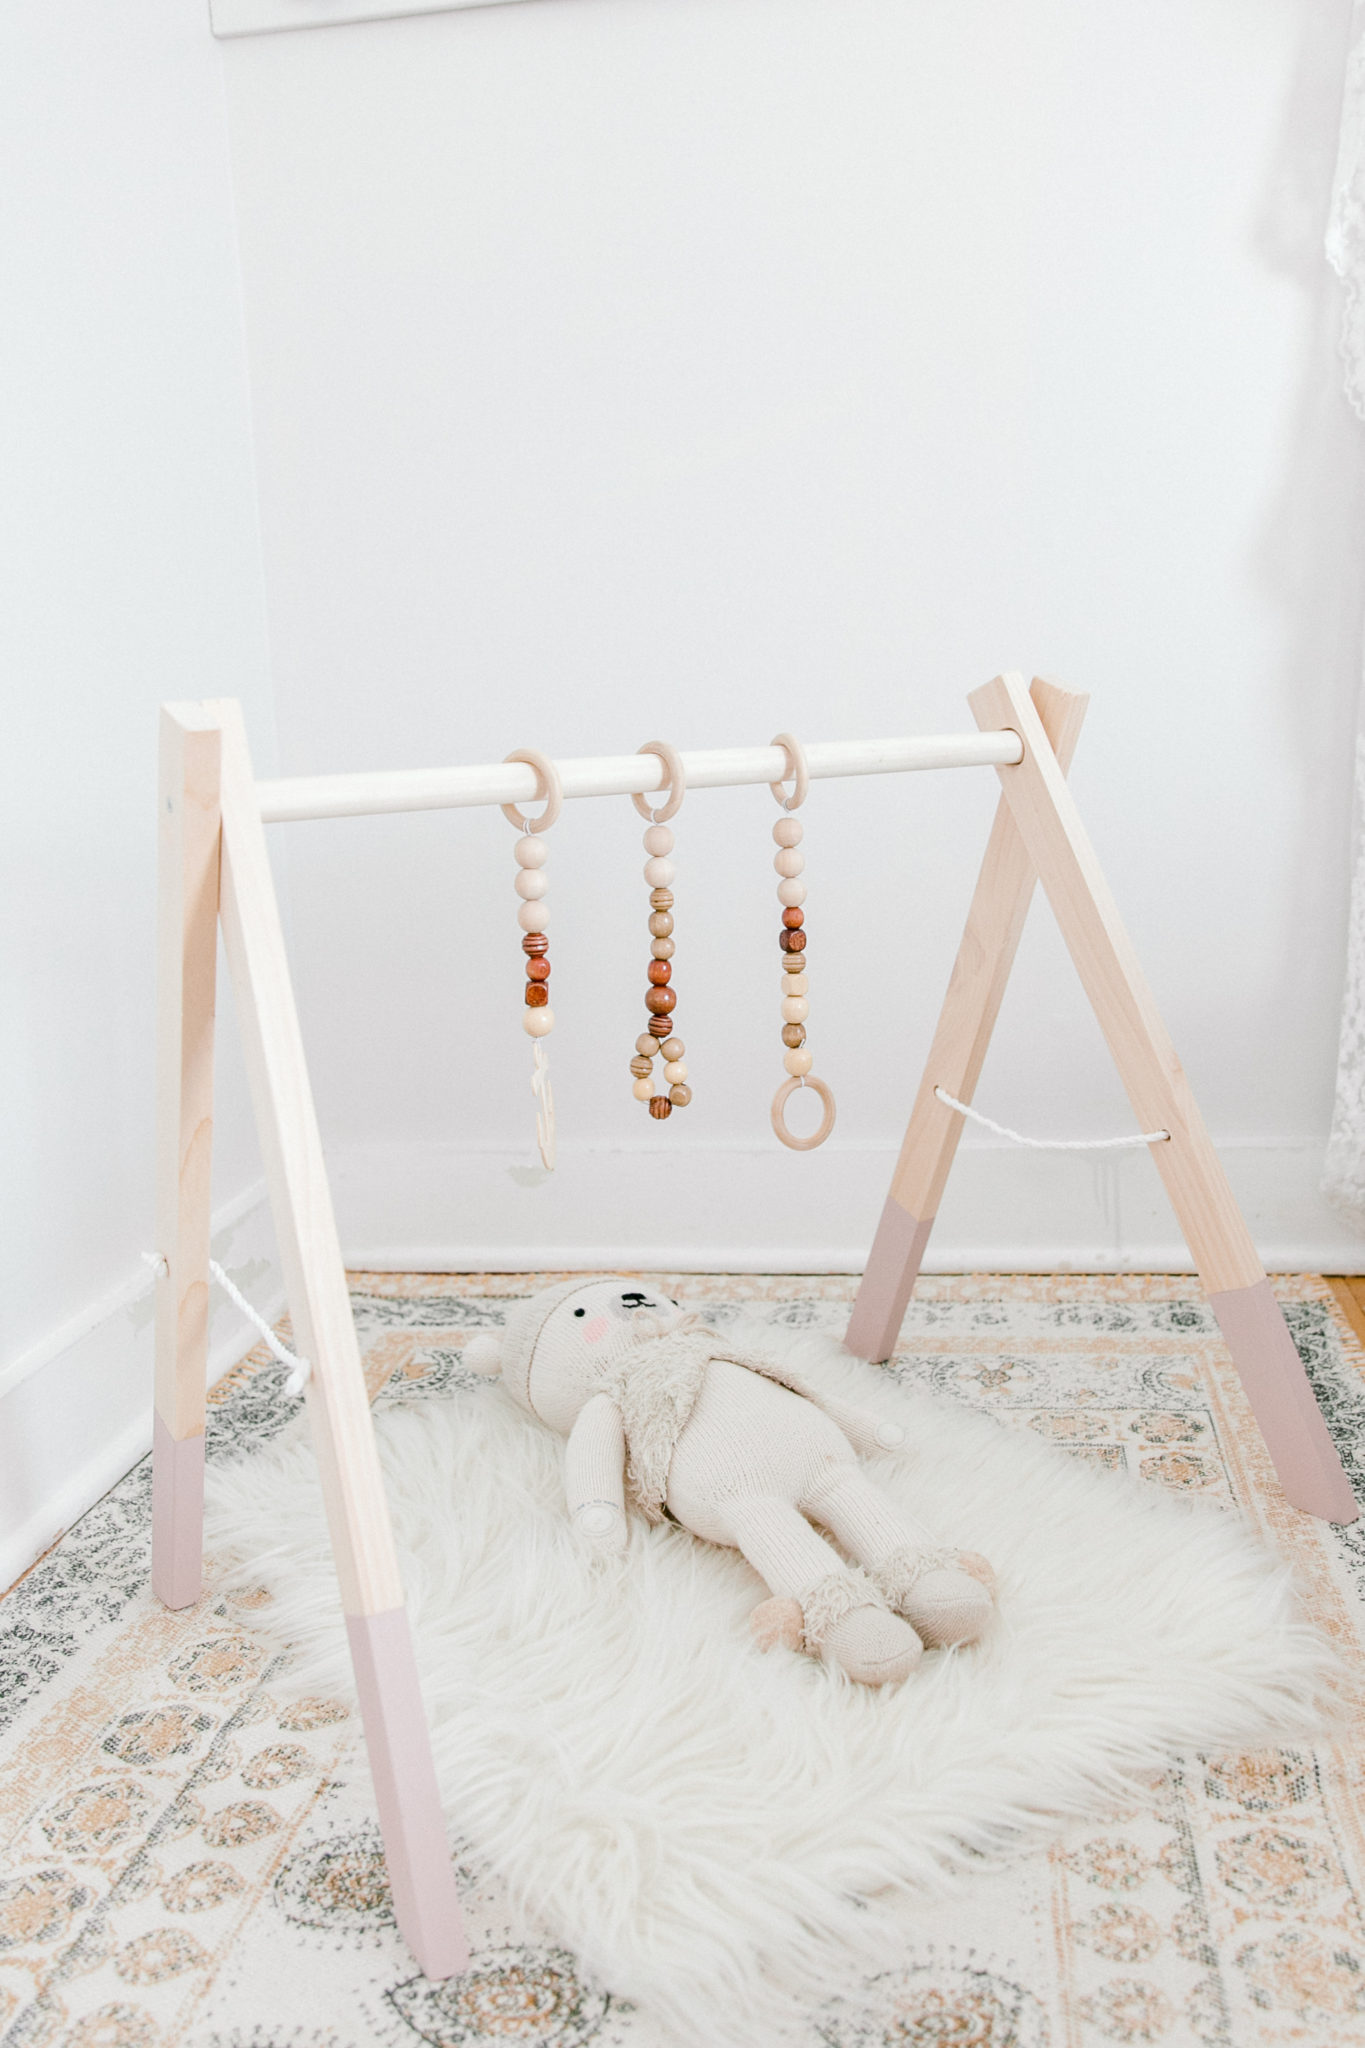 wooden baby gym